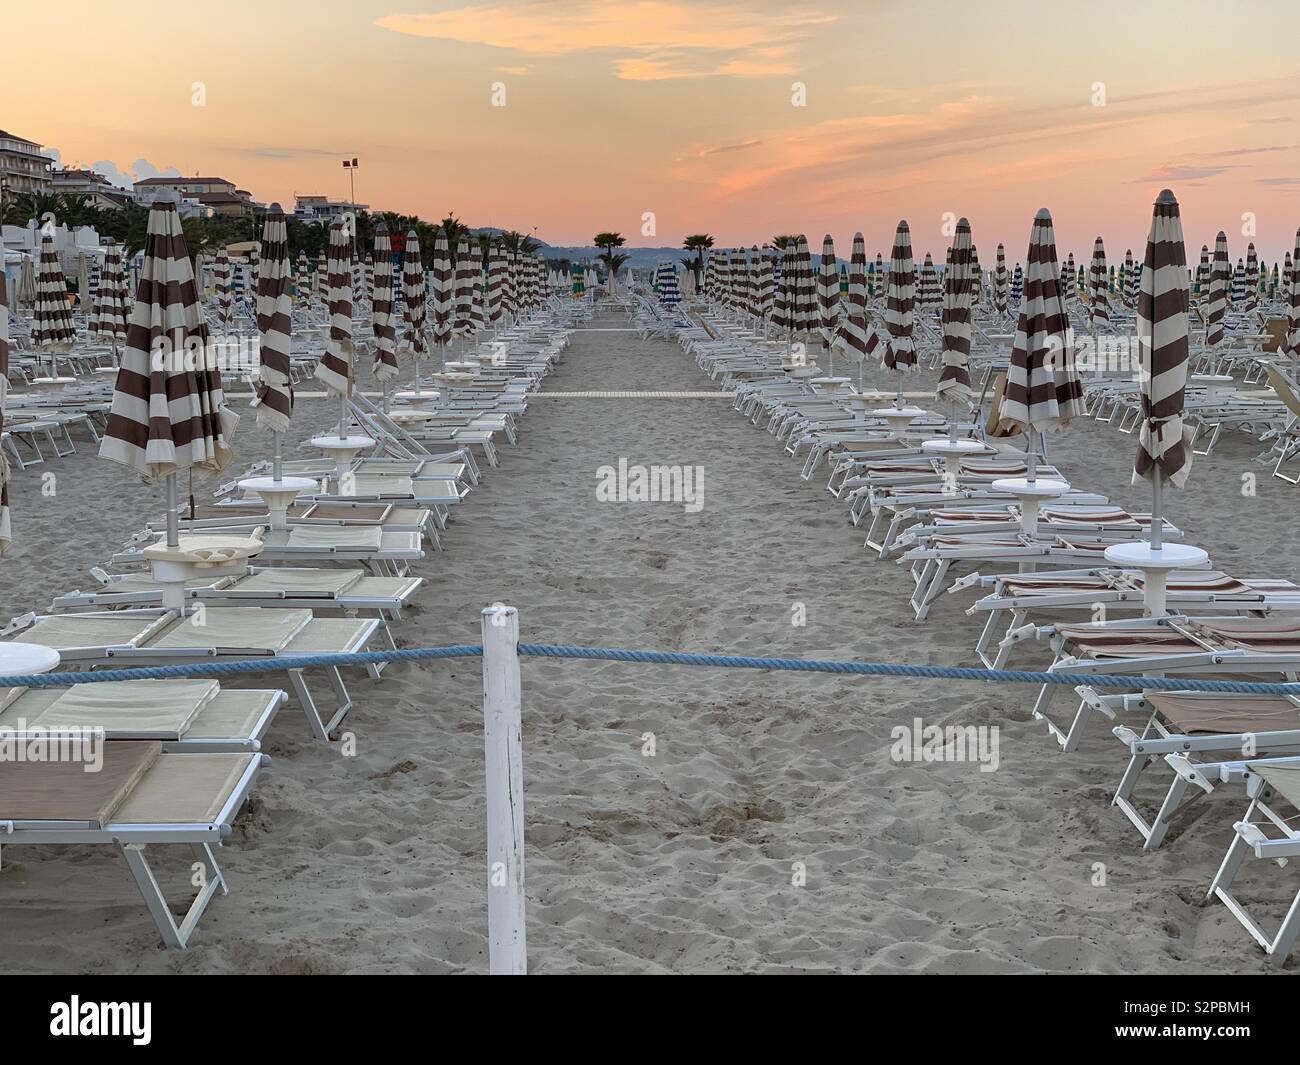 Beach umbrellas and chaise longues view at the end of the day Stock Photo